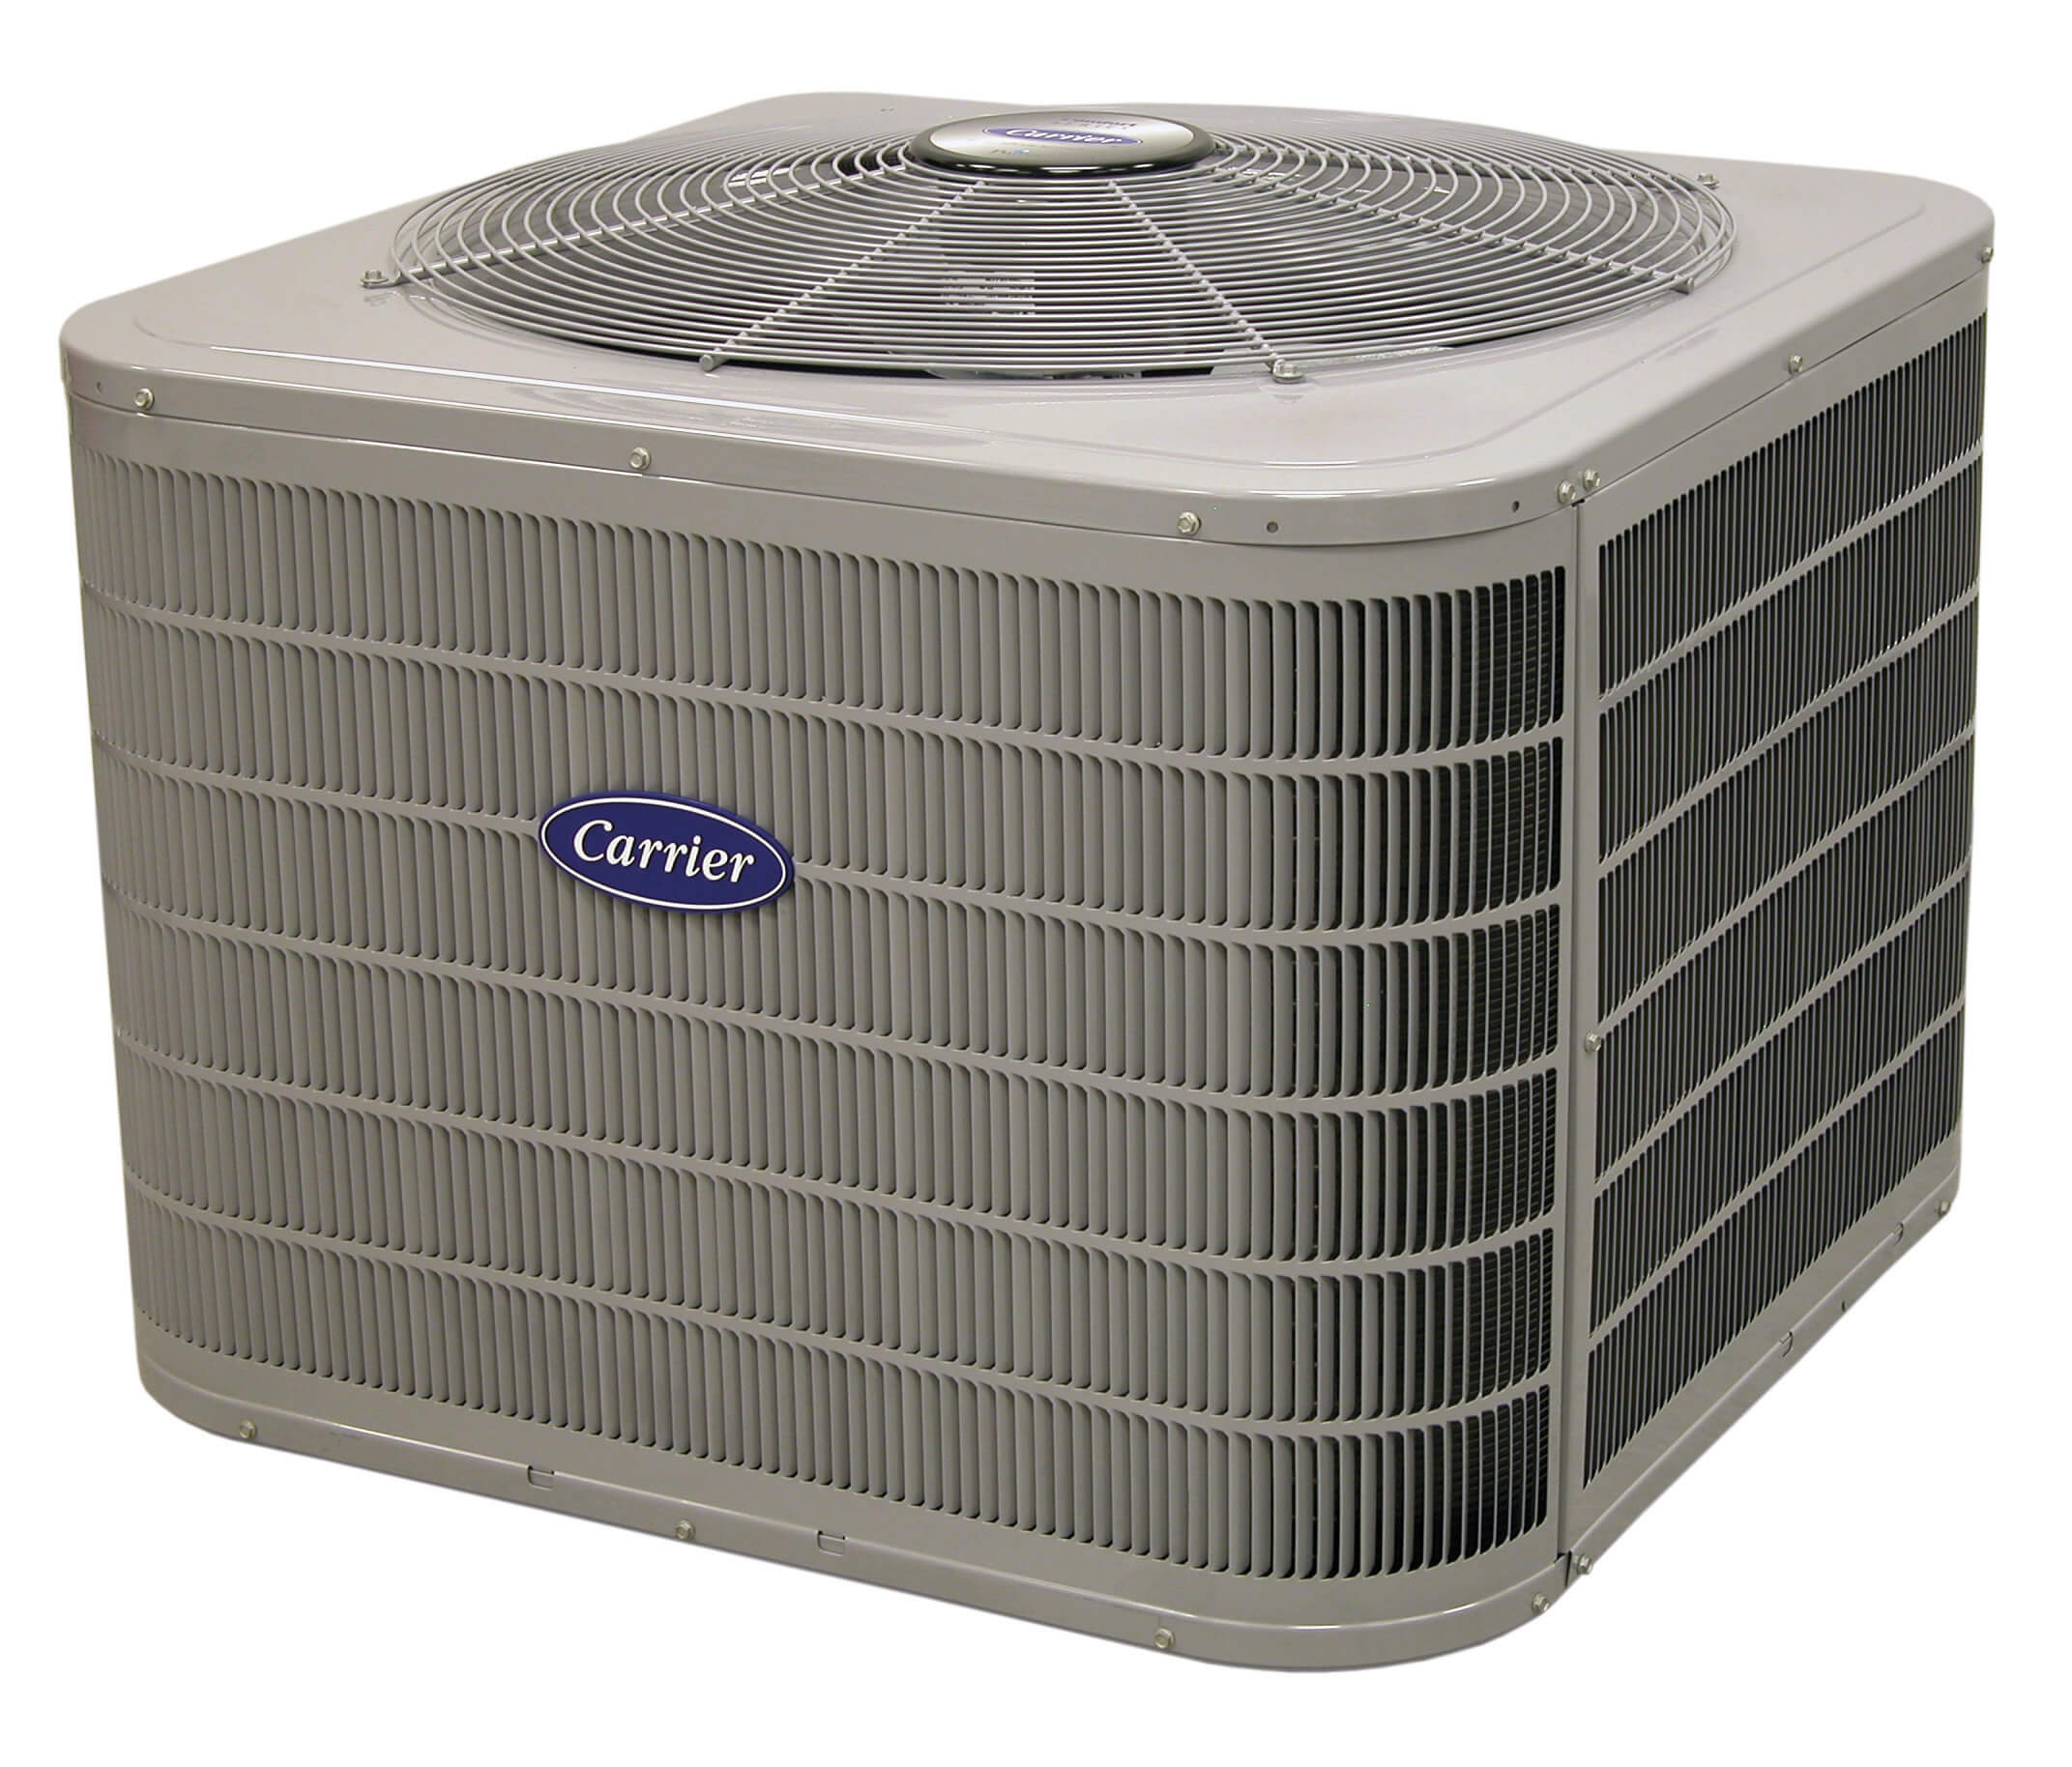 New Carrier air conditioner